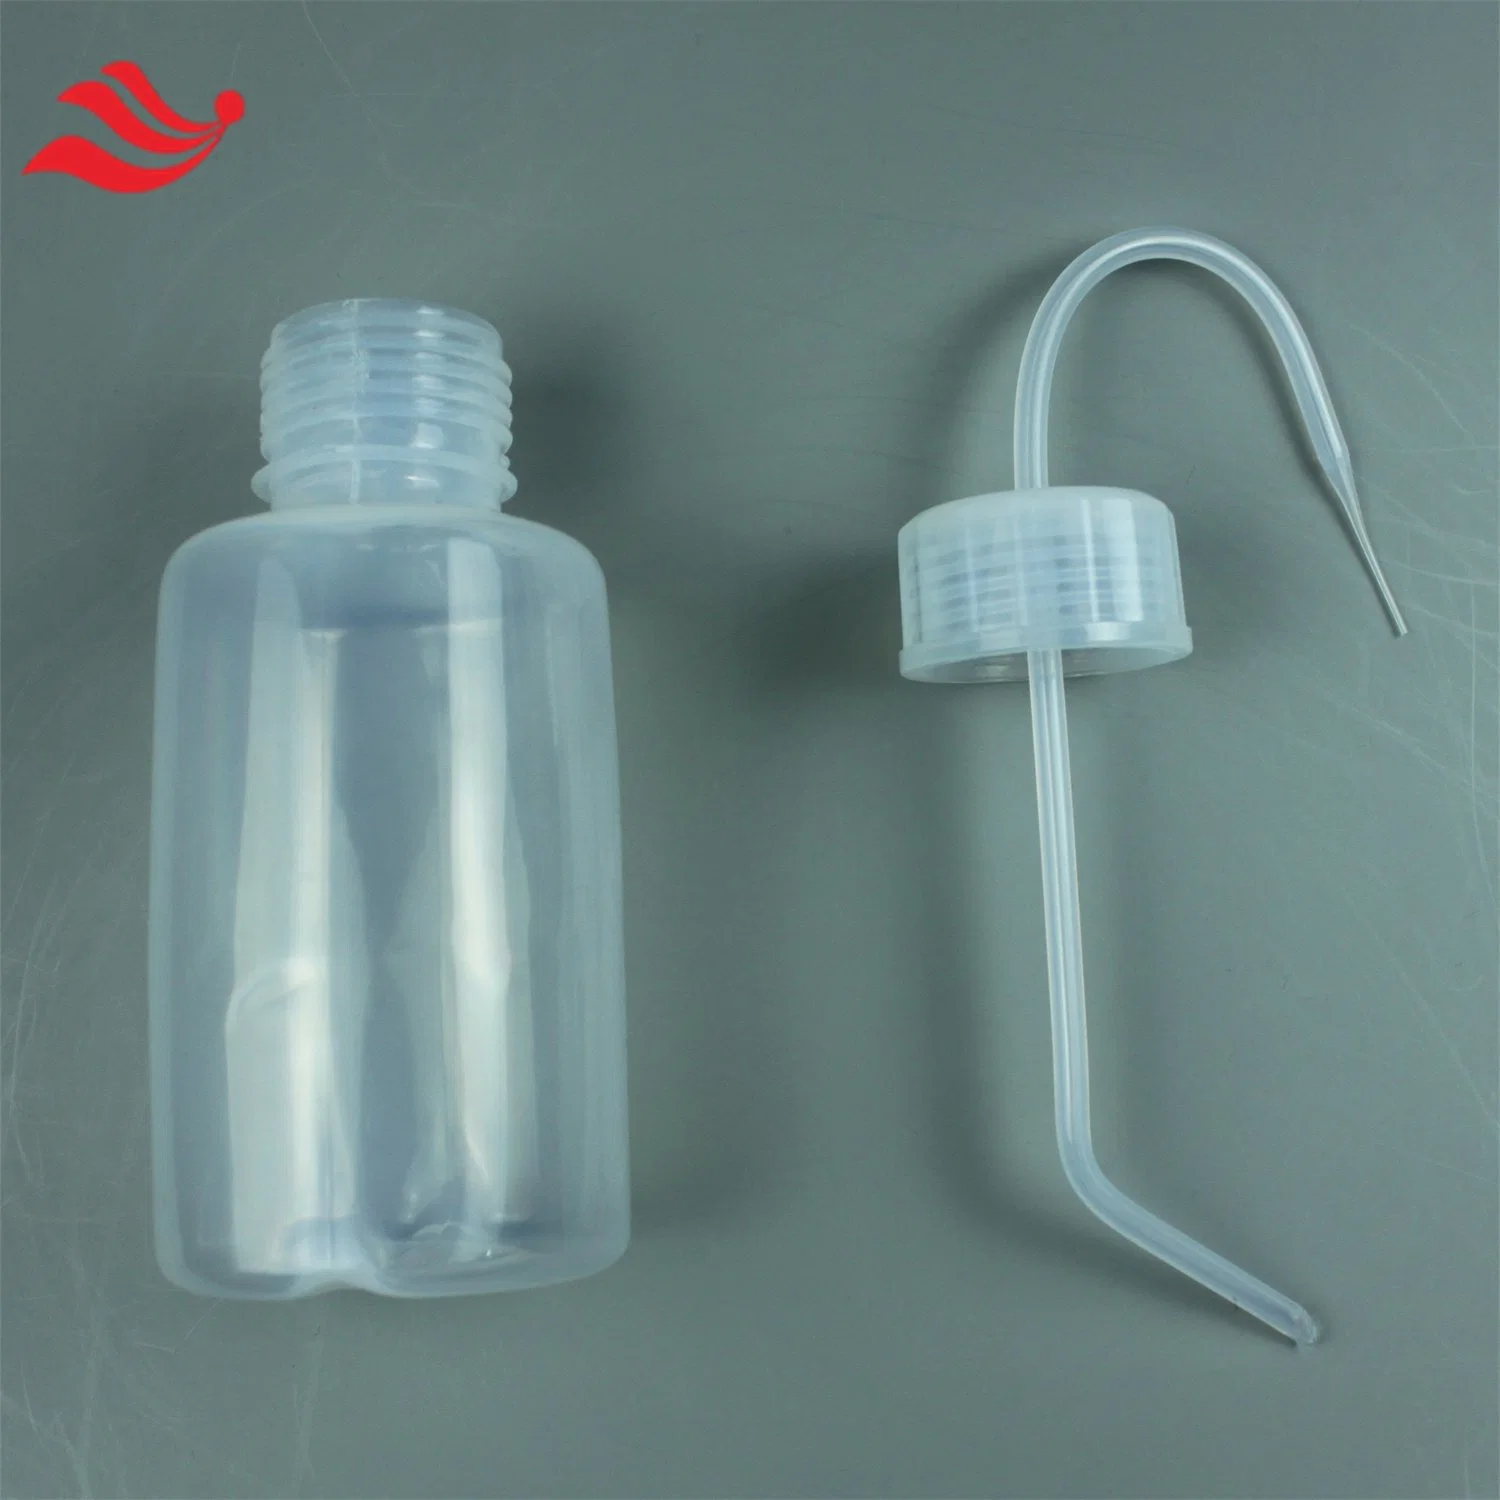 500ml PFA Wash Bottle Containers Plastic Bottle Plastic Products Lab